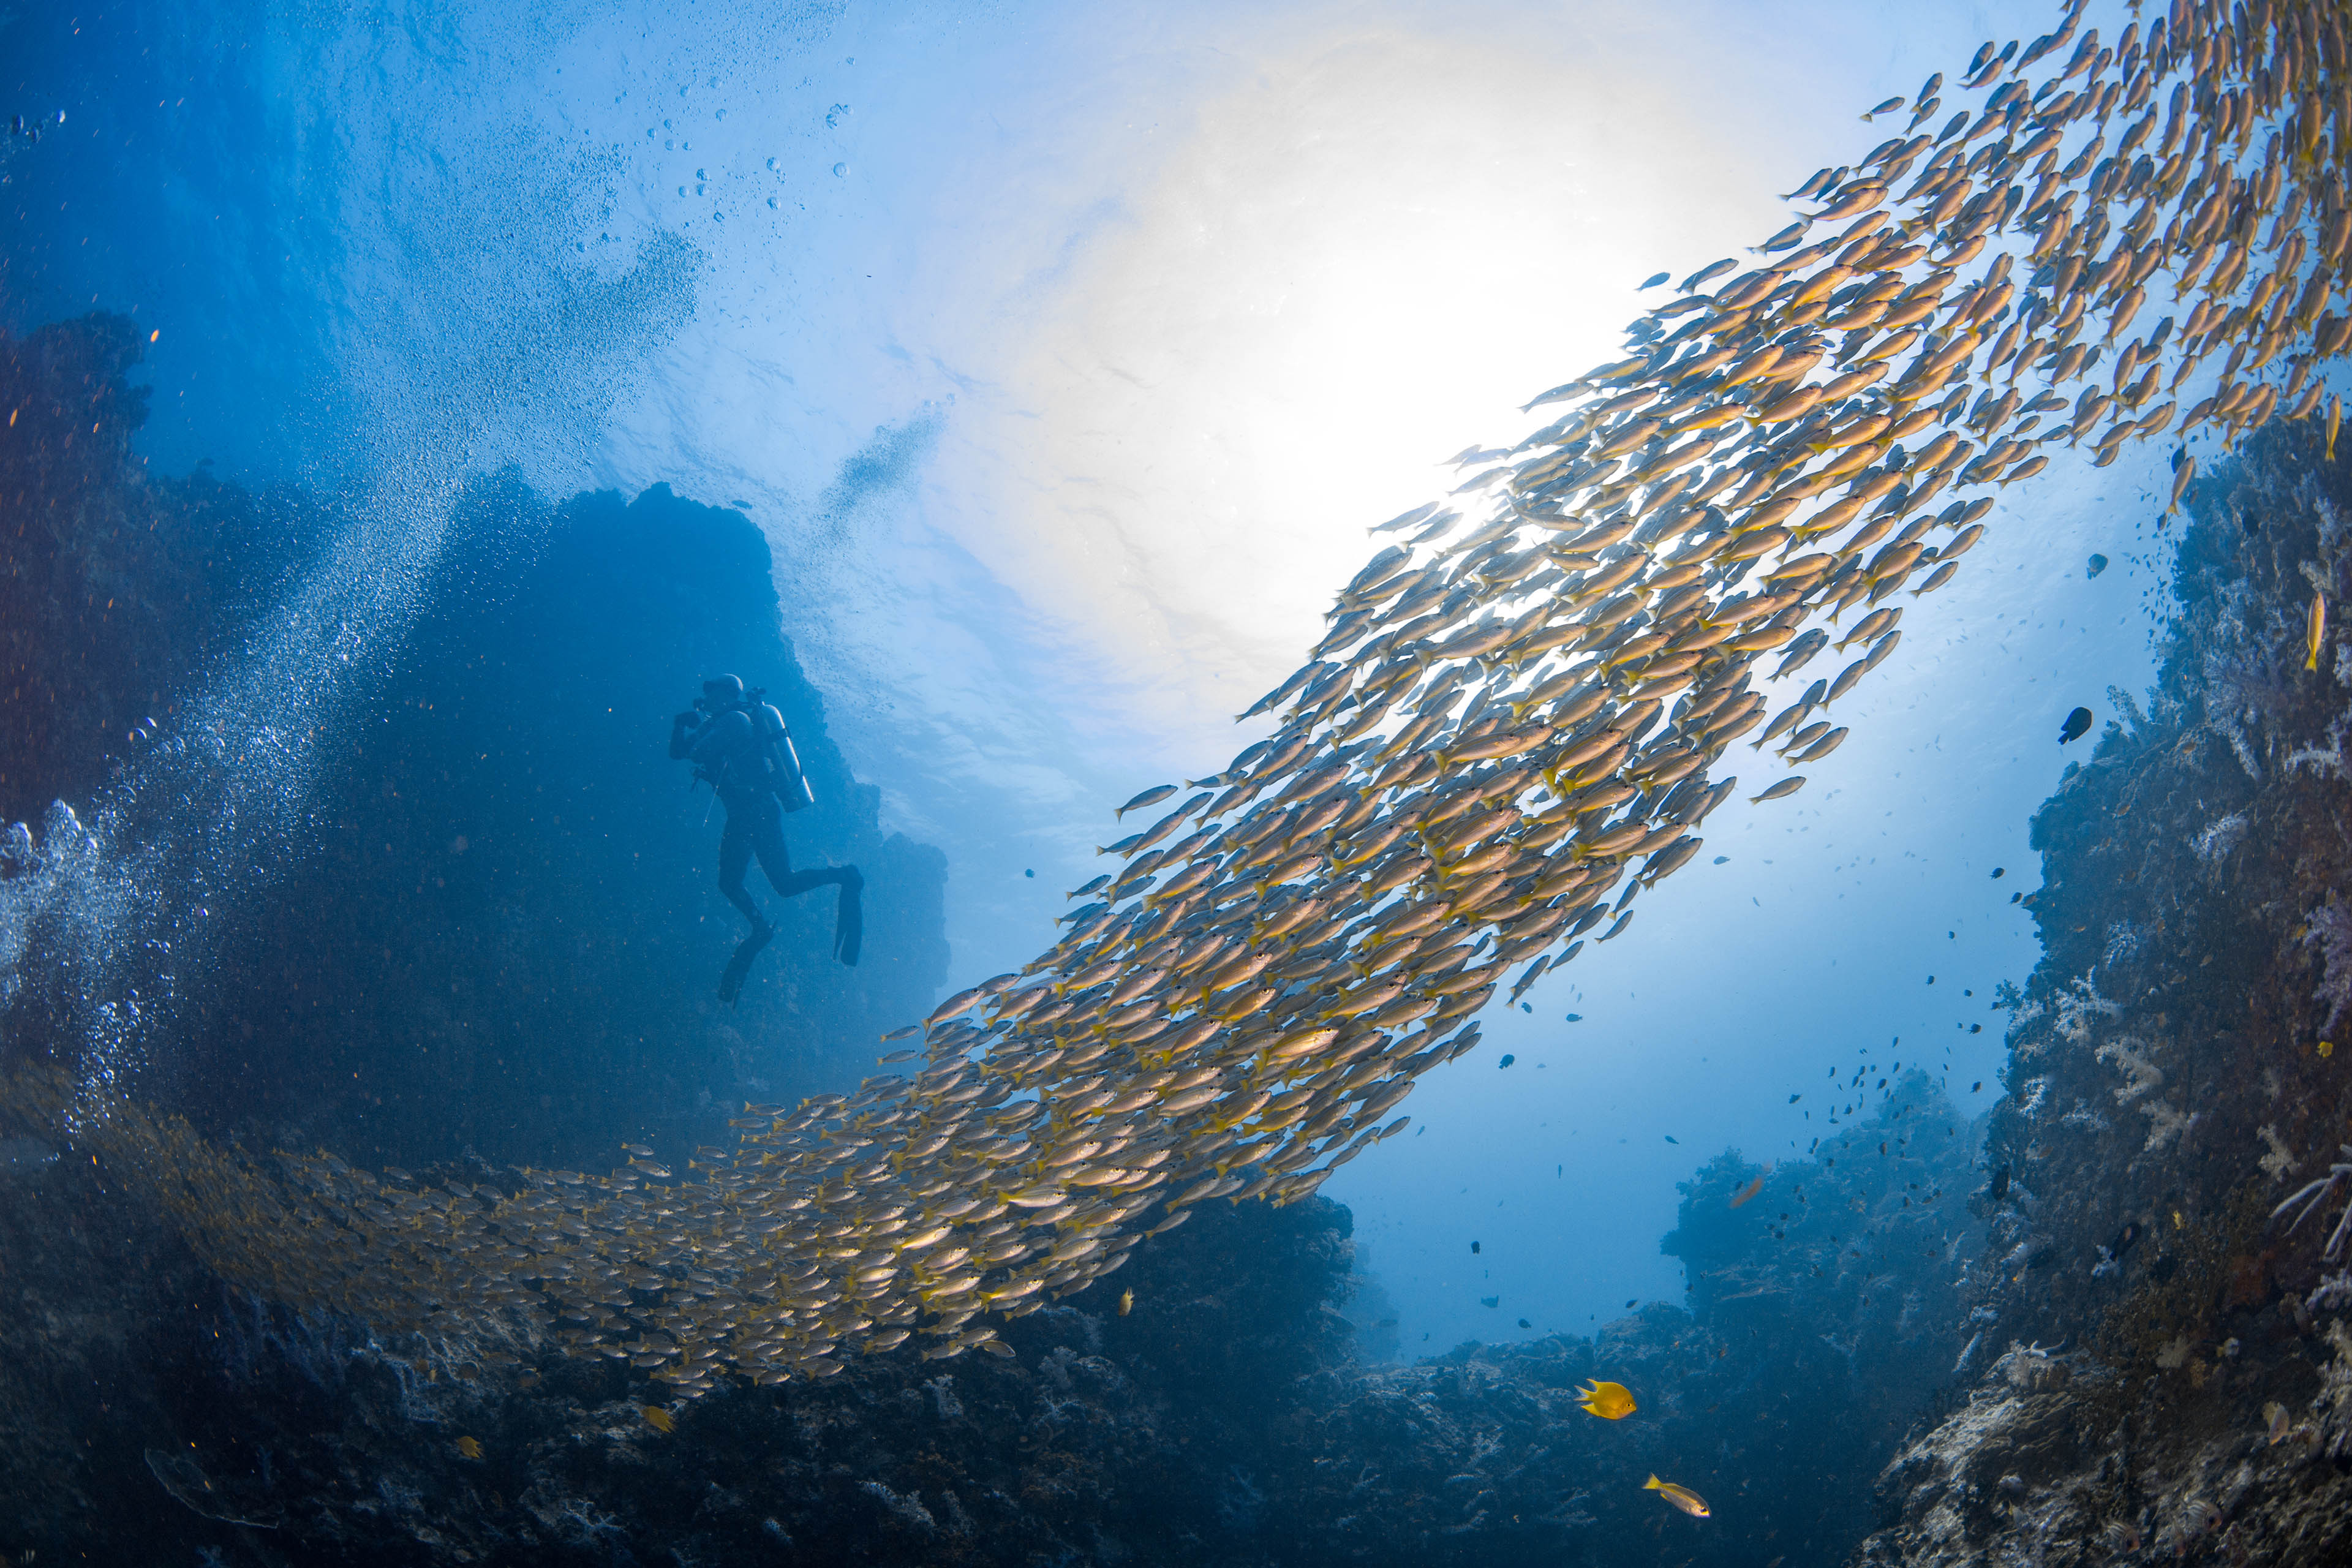 diver watching a school of yellowtail snapper swimming pass by